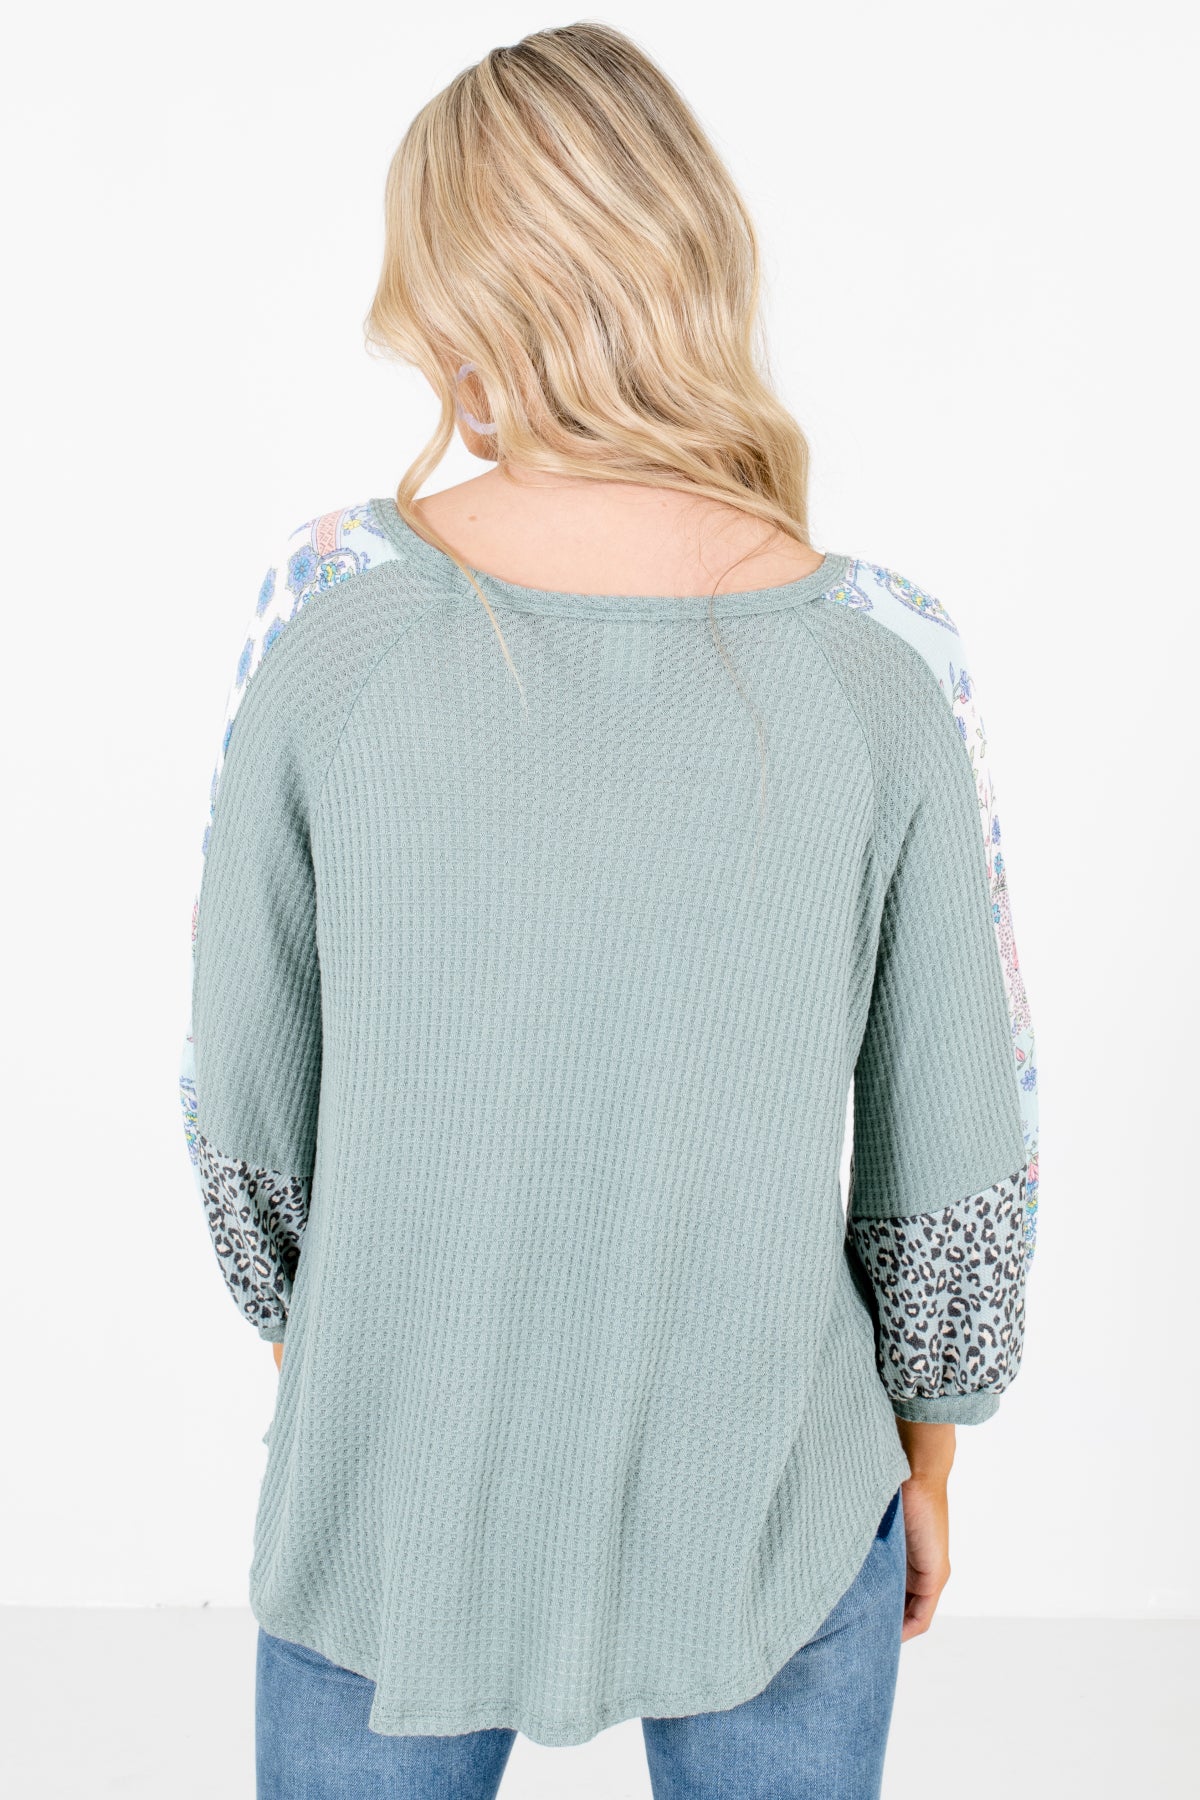 Women's Green Patterned Sleeve Boutique Blouse